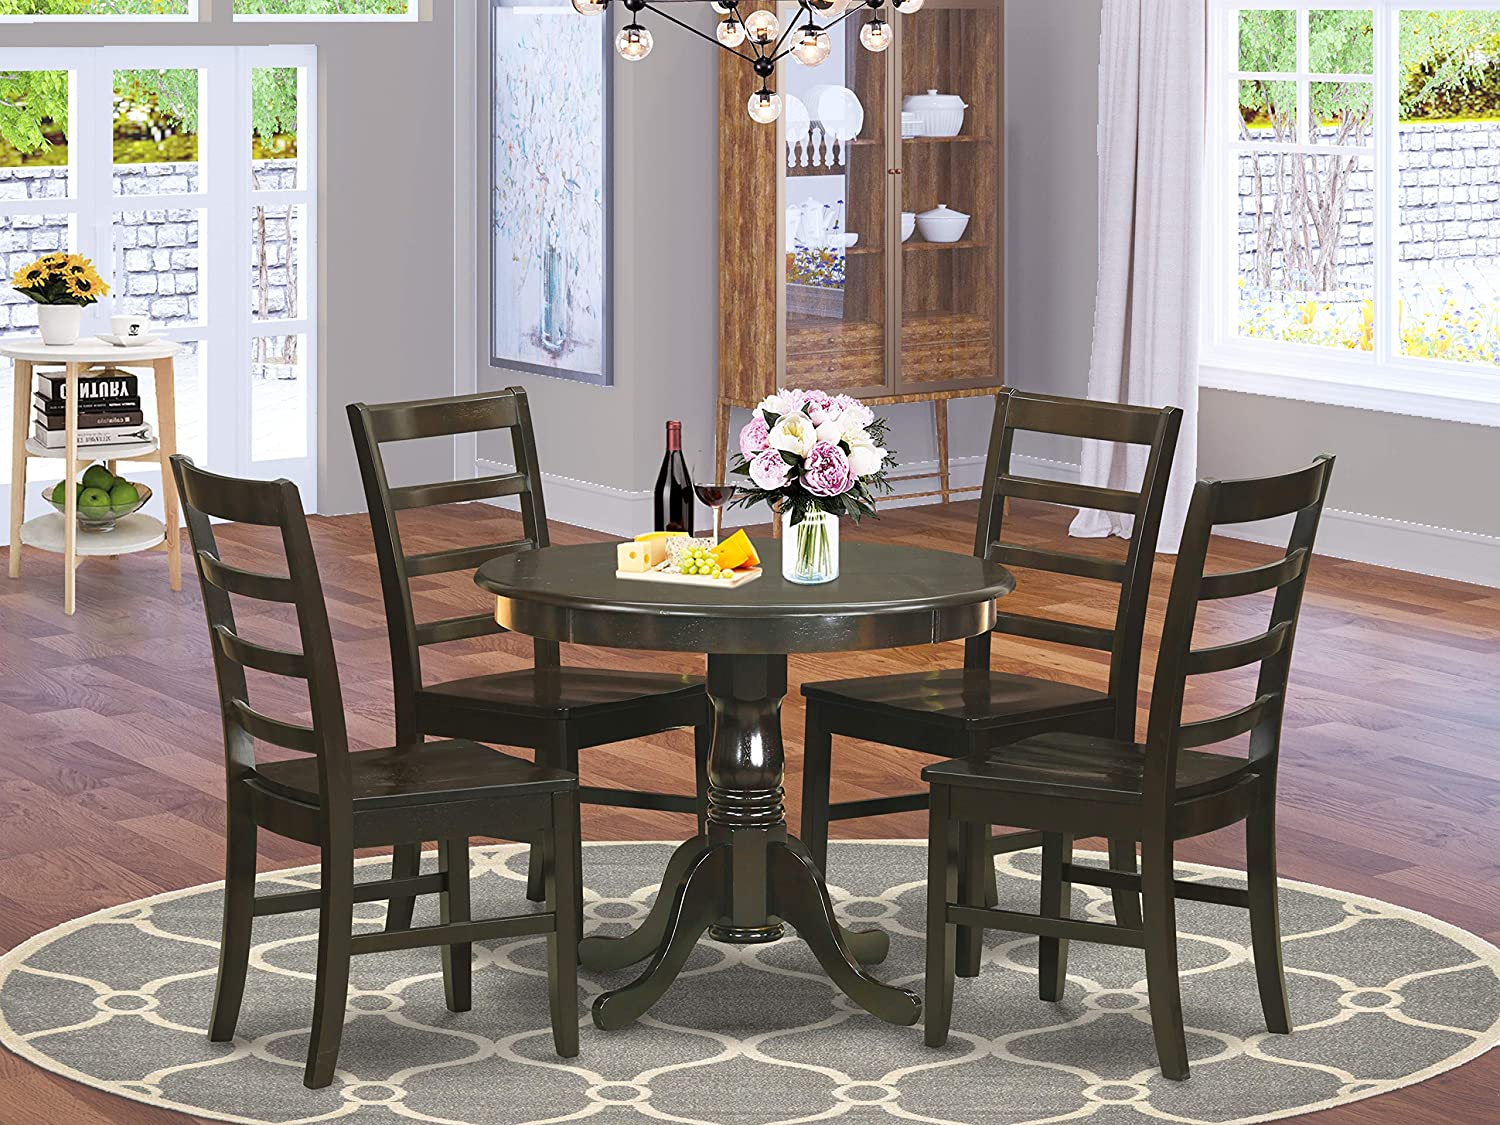 East West Furniture Kitchen Dining Table Set- 4 Fantastic Kitchen Chairs - A Beautiful Round Wooden Table- Wooden Seat and Cappuccino Wood Dining Table